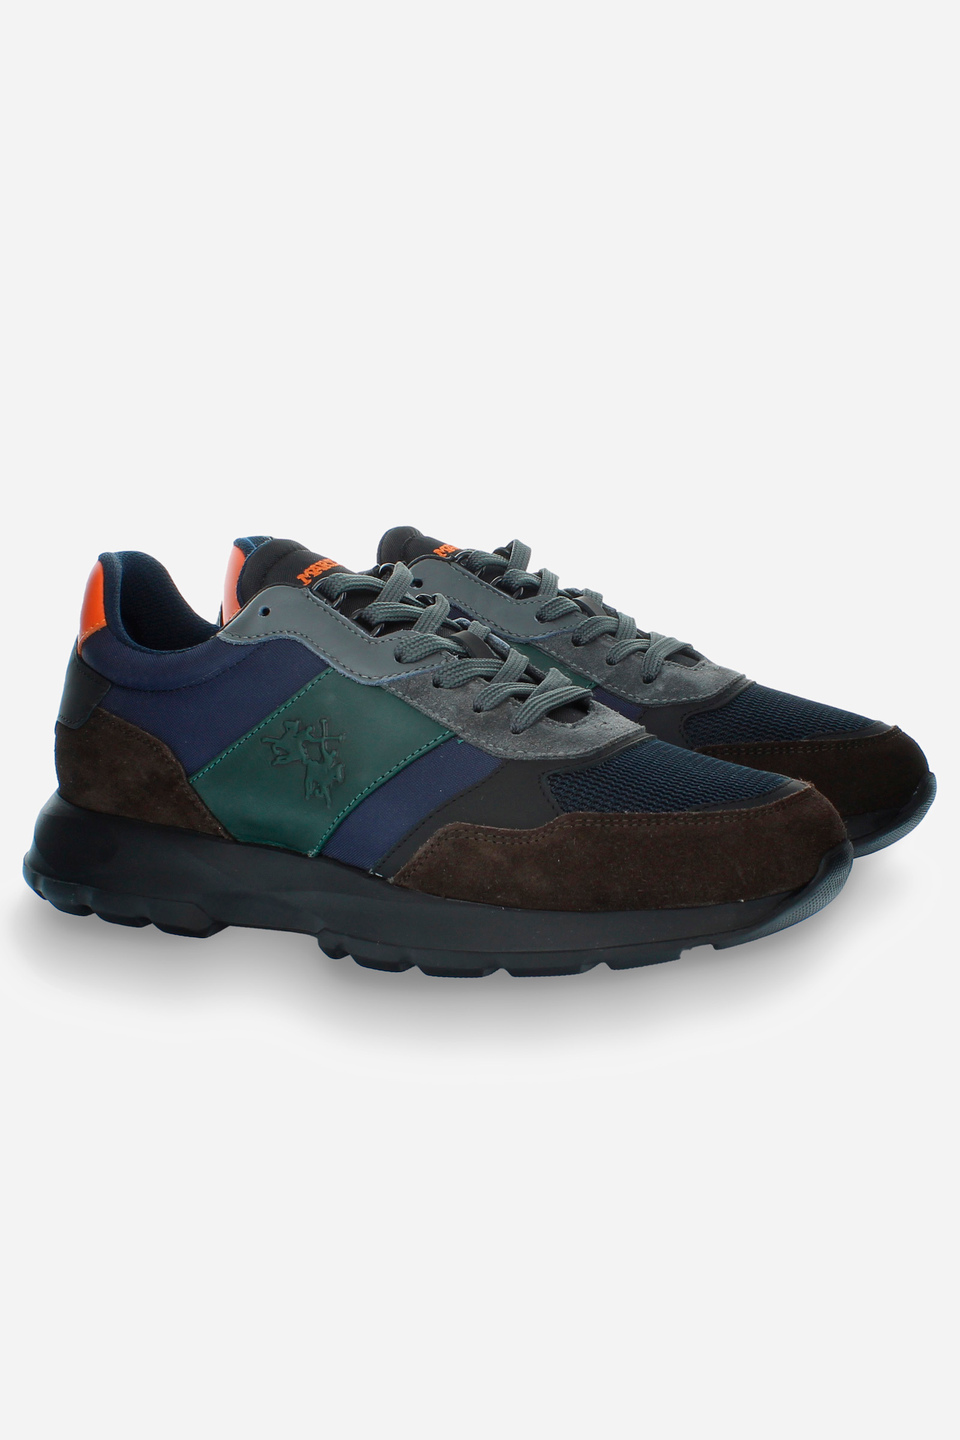 Sneaker in mix of leather, suede and fabric DARK BROWN/BLUE La Martina ...